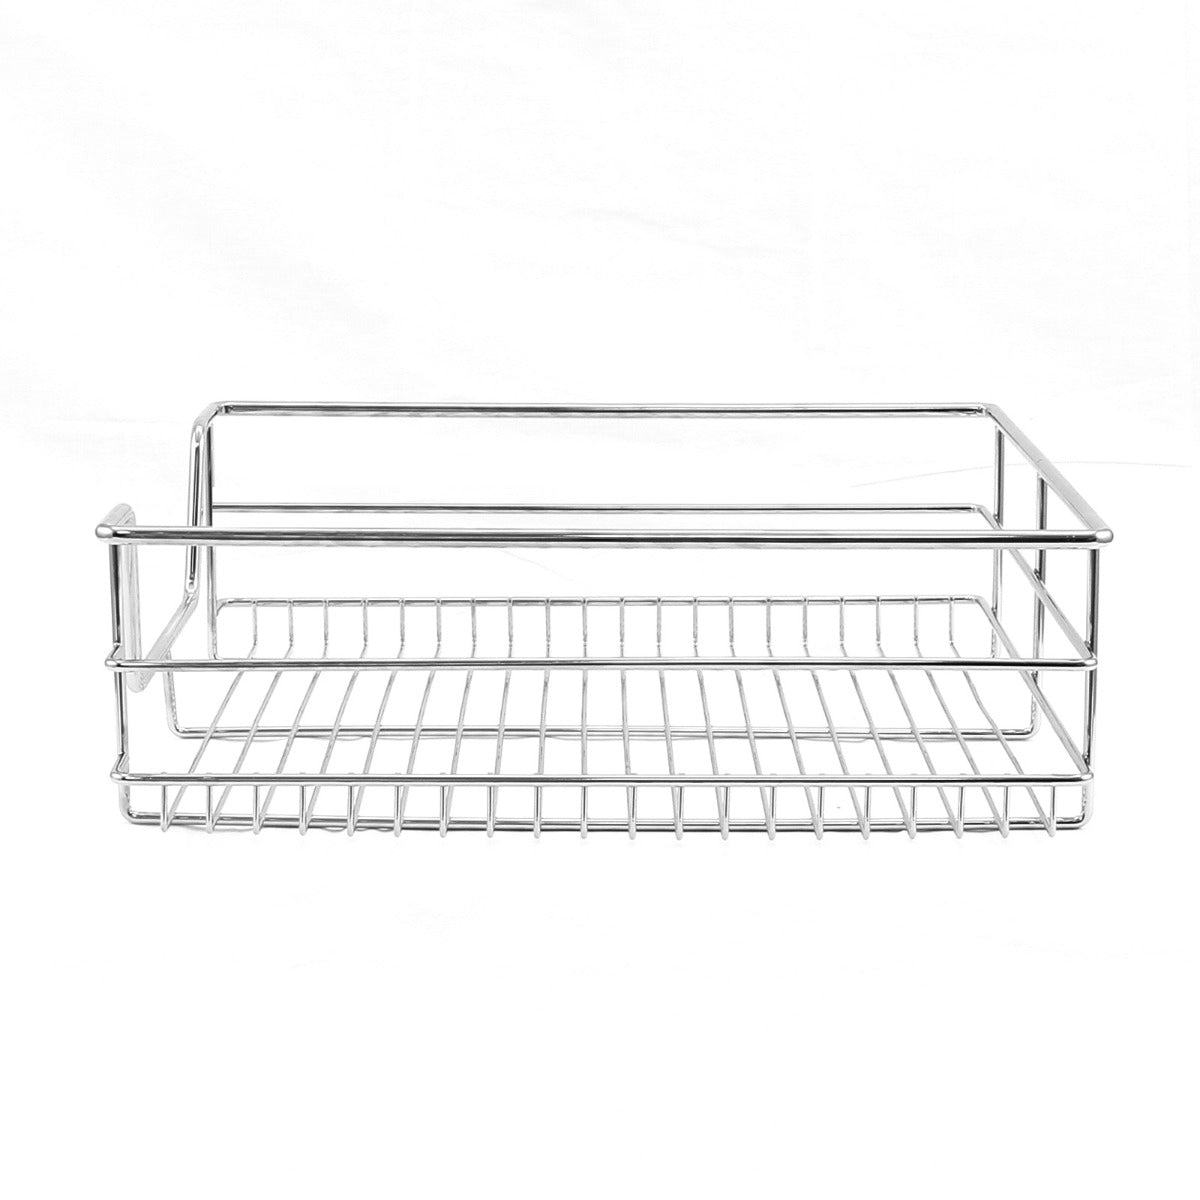 5 x KuKoo Kitchen Pull Out Storage Baskets – 400mm Wide Cabinet